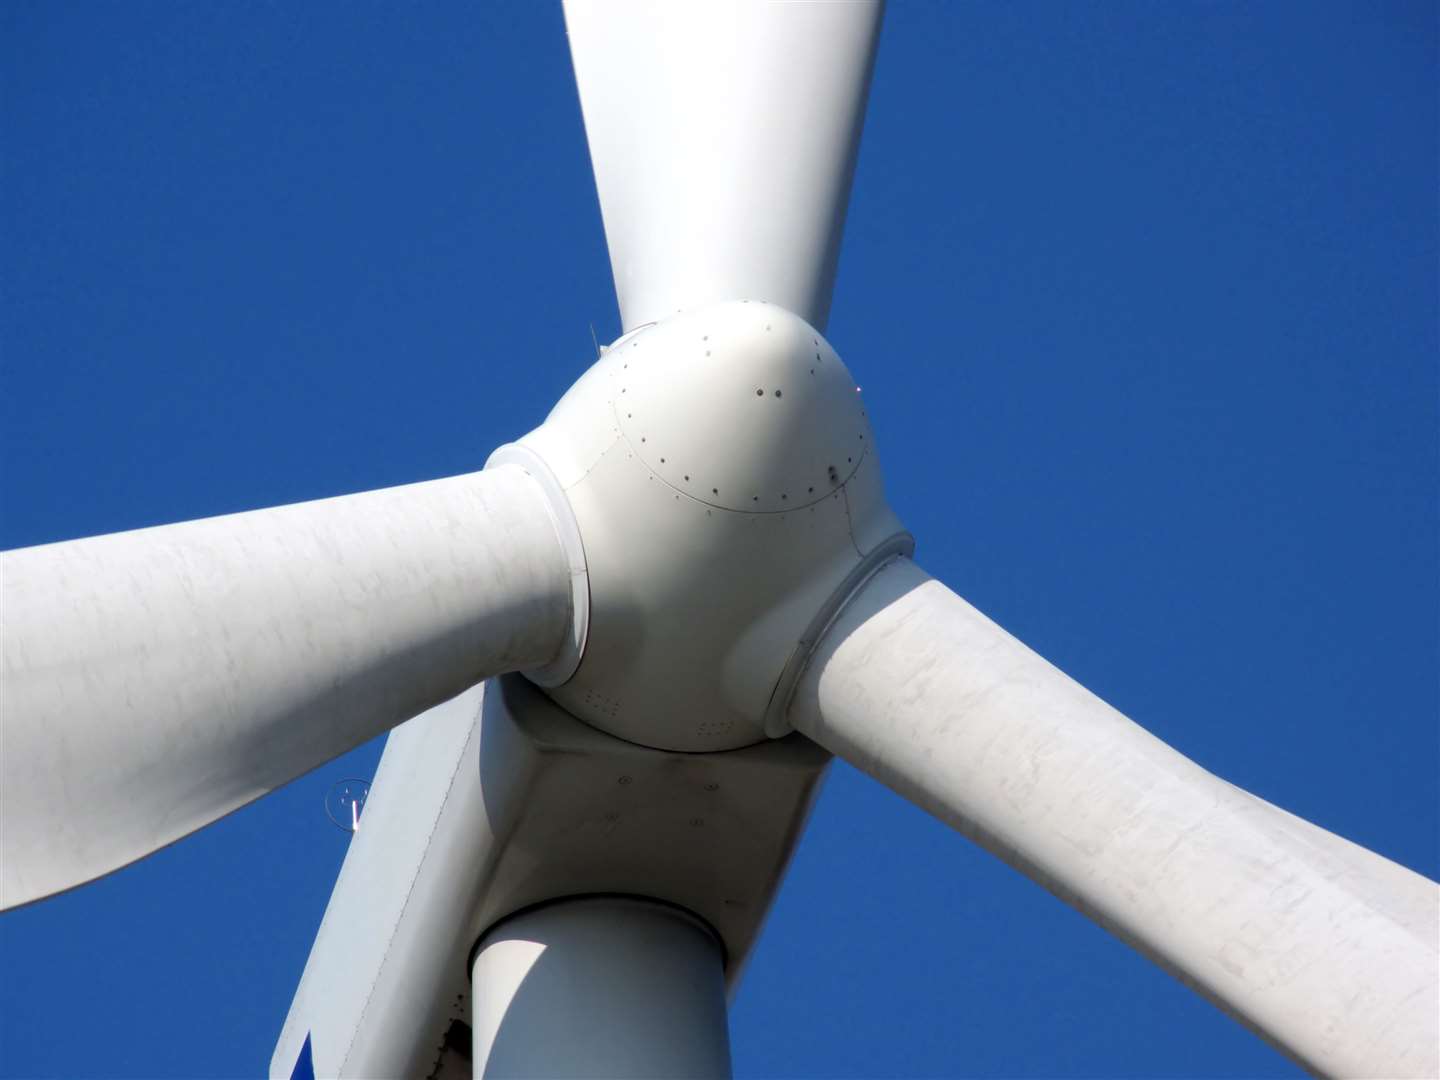 Fifteen turbines are proposed at Kintradwell.